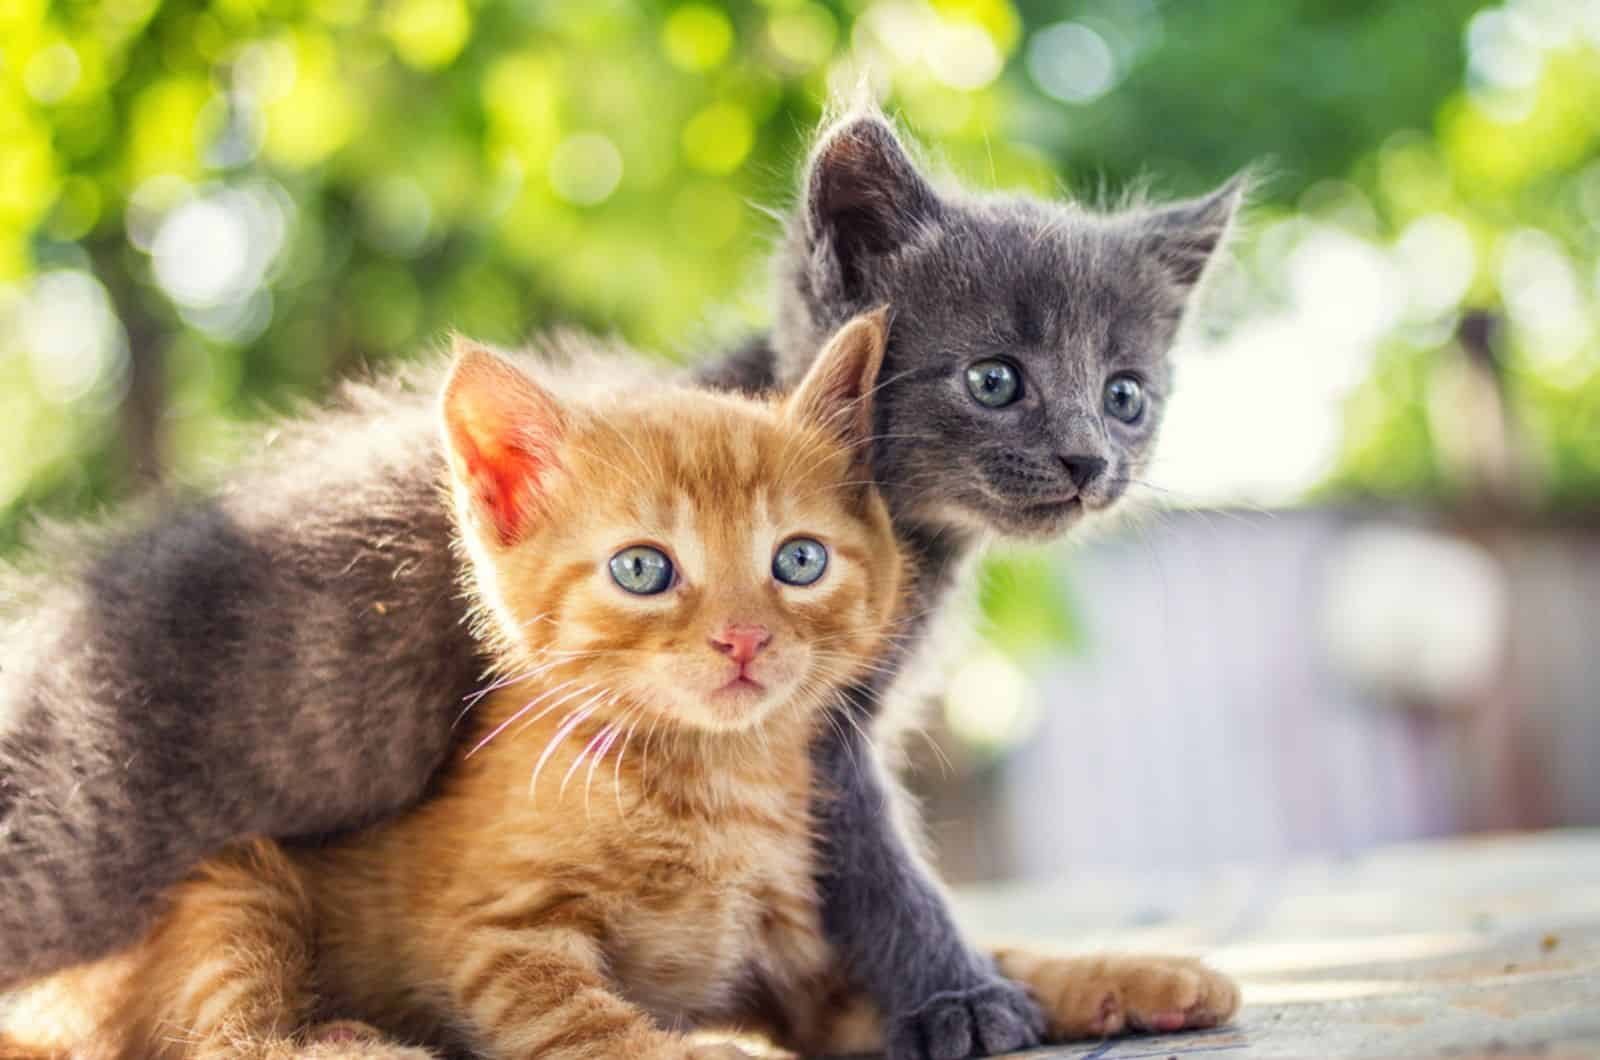 Two adorable kittens playing together